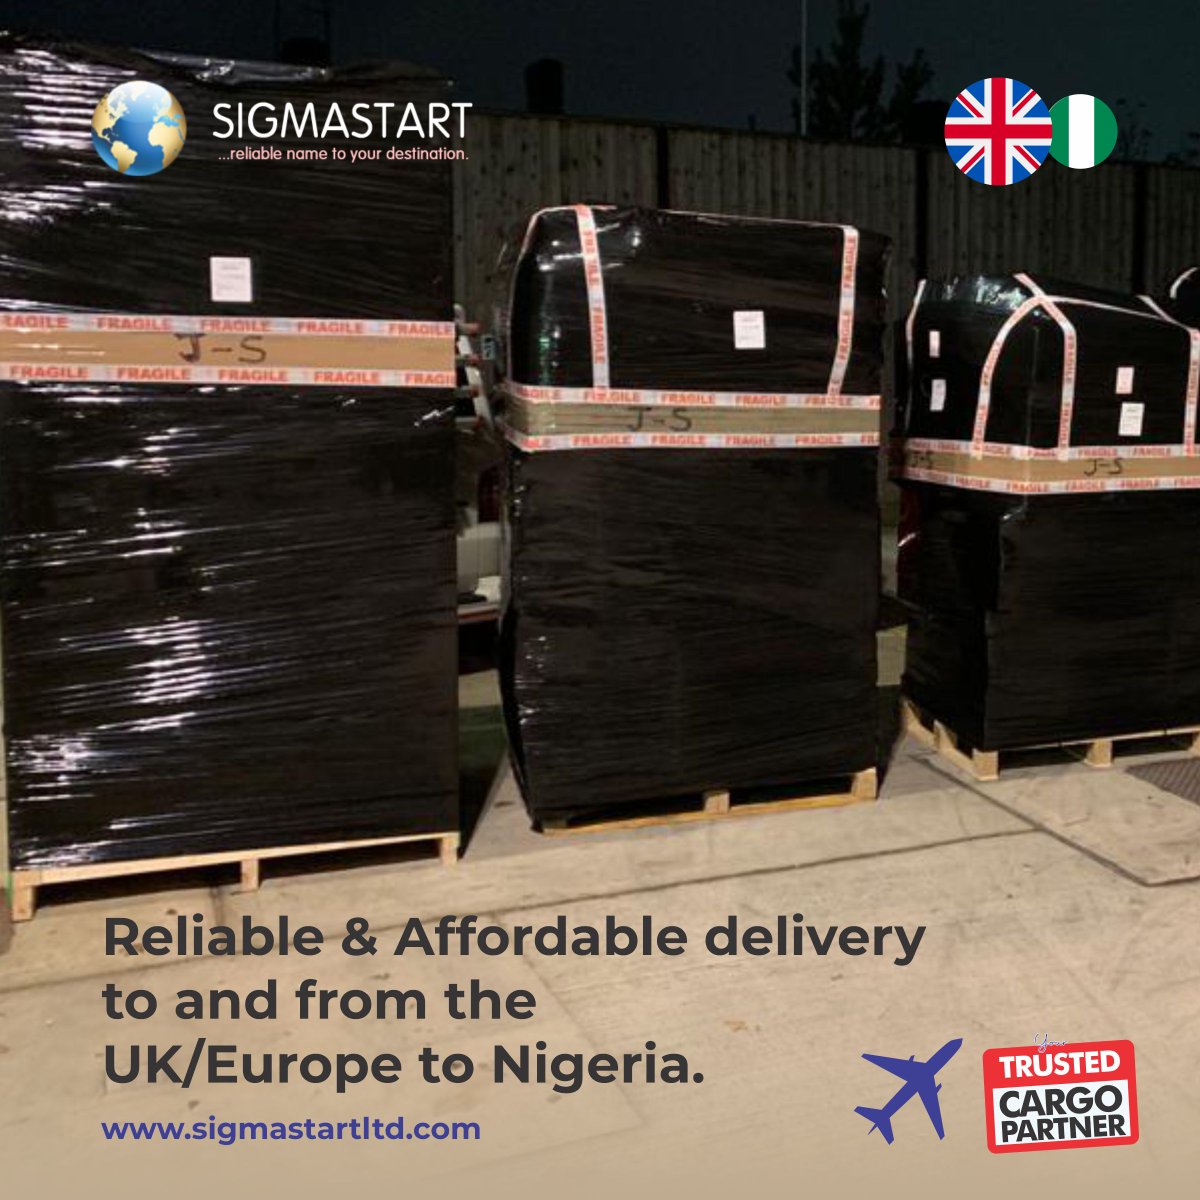 Reliable &  Affordable delivery to and from the UK/Europe to Nigeria. Air / Sea Freight

#doorstepdelivery #corporateclient #nigeriansindiaspora #london #cargotonaija #uknaija #uk #southlondon #nigeriansindiaspora #china #france #germany #india #sea #shipping #shippingcontainer